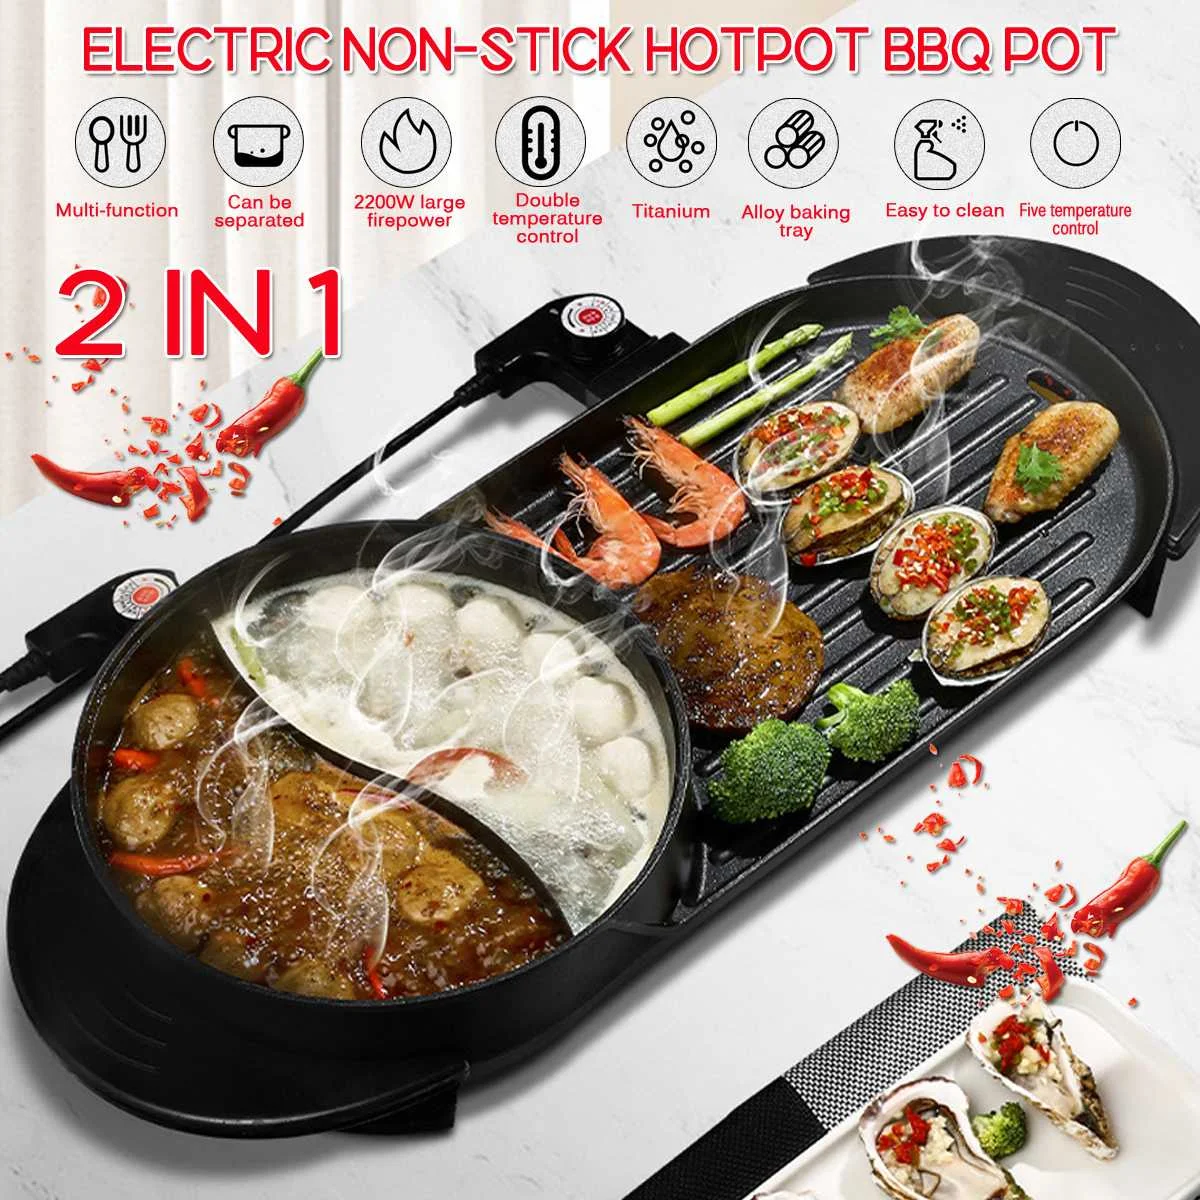 

2 in 1 Electric Hot Pot Oven Multi Cooker Barbecue Pan Smokeless Barbecue Griddle 2200W Non-Stick Shabu Pot Hotpot Baking Plat